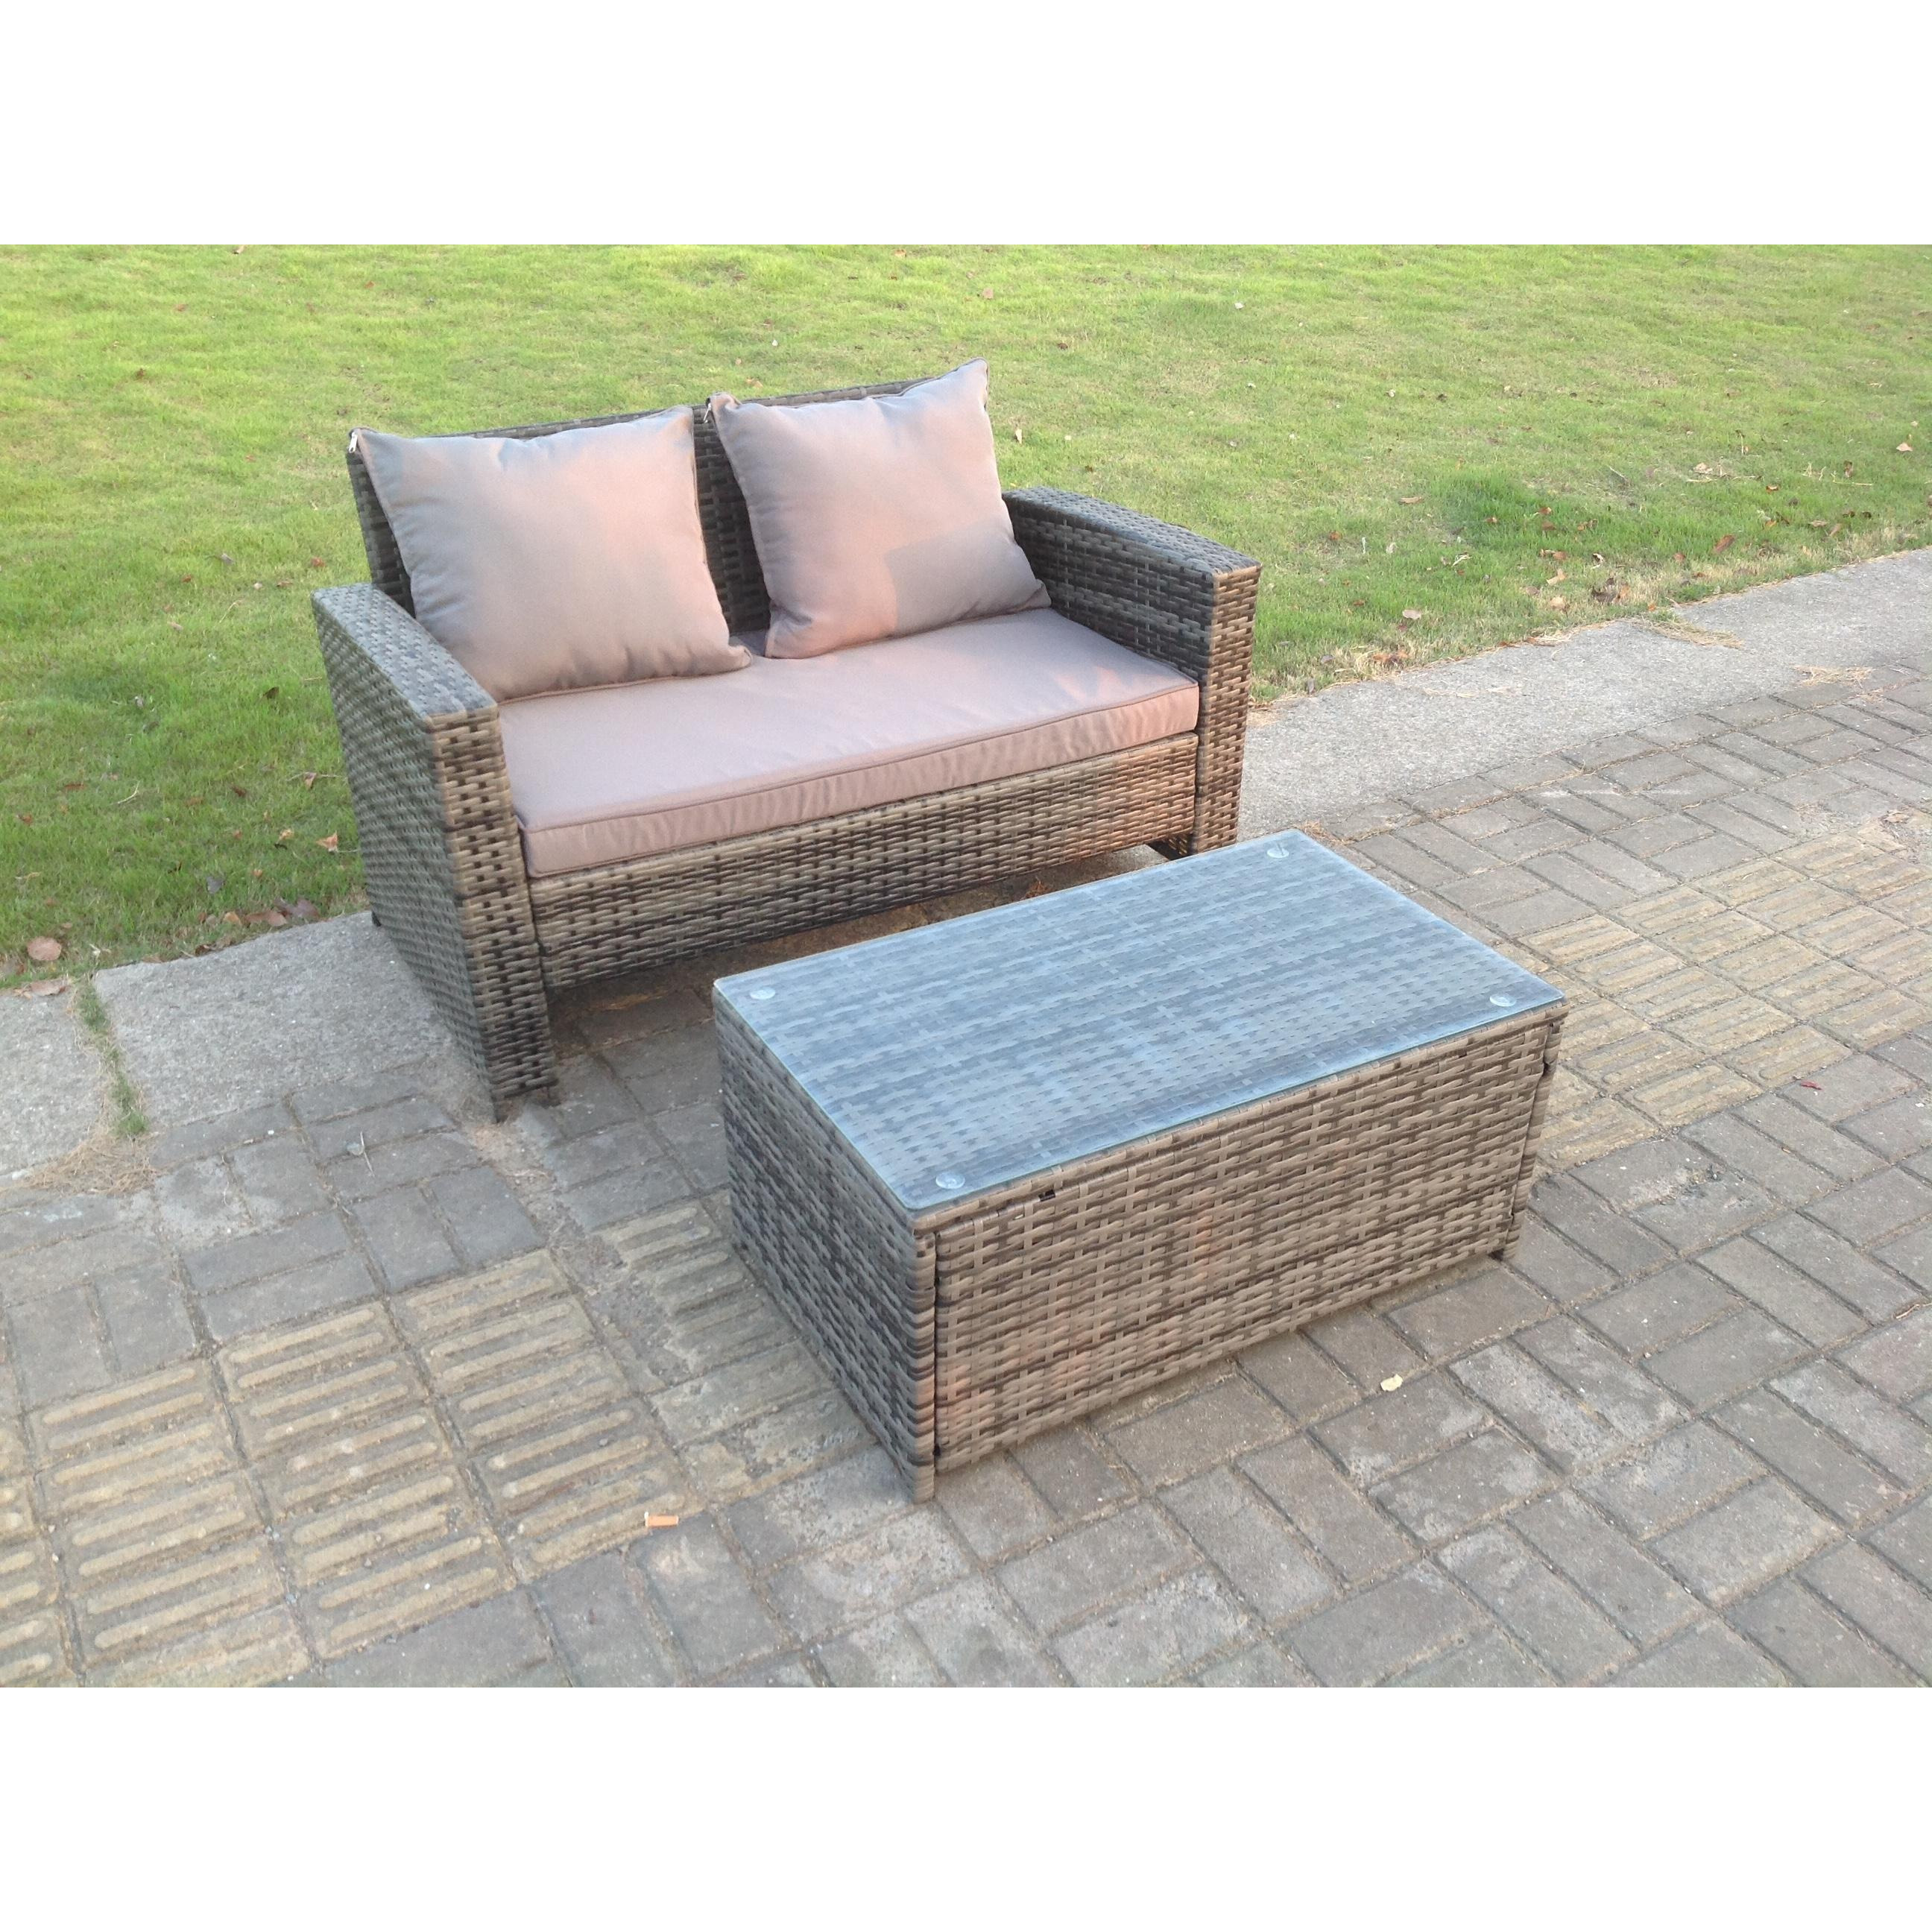 Dark Mixed Grey High Back Rattan Garden Furniture 2 Seater Love Seat Sofa With Oblong Coffee Table - image 1